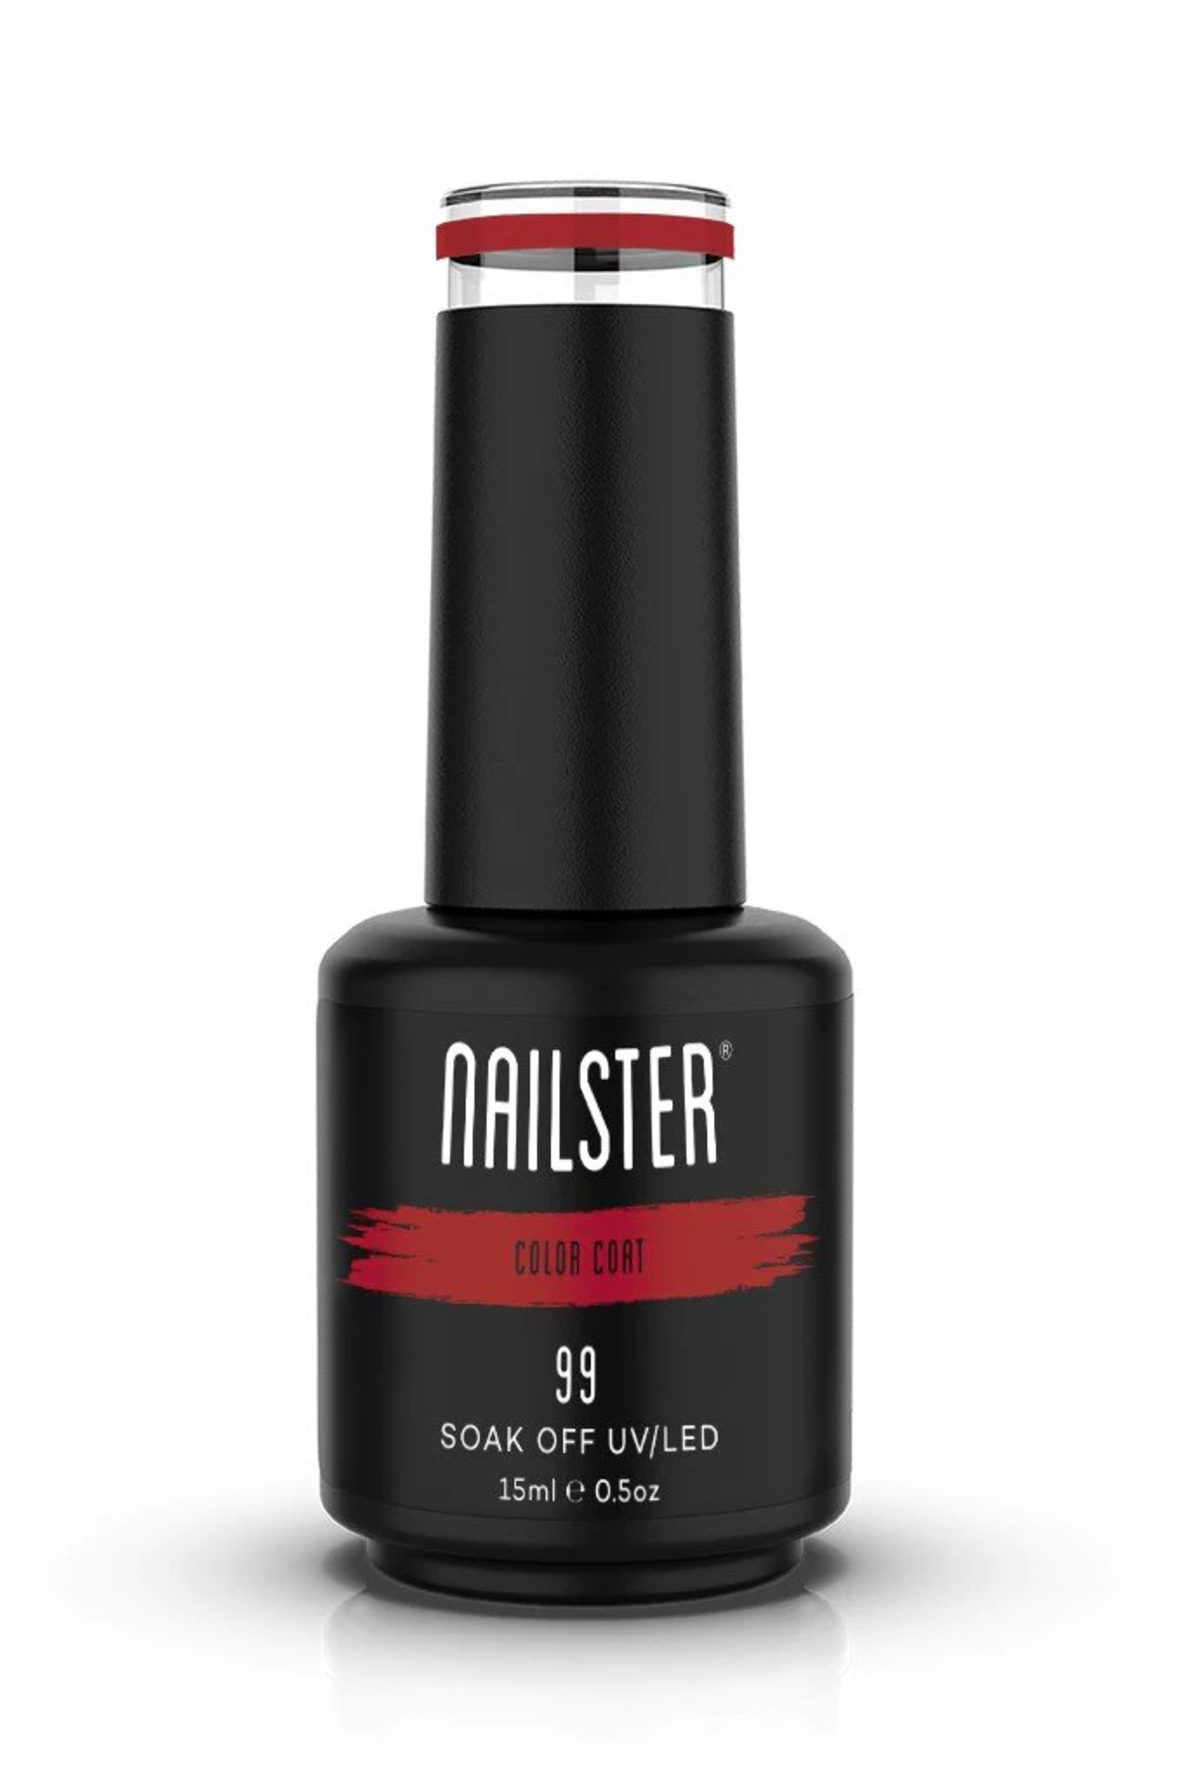 Nailster